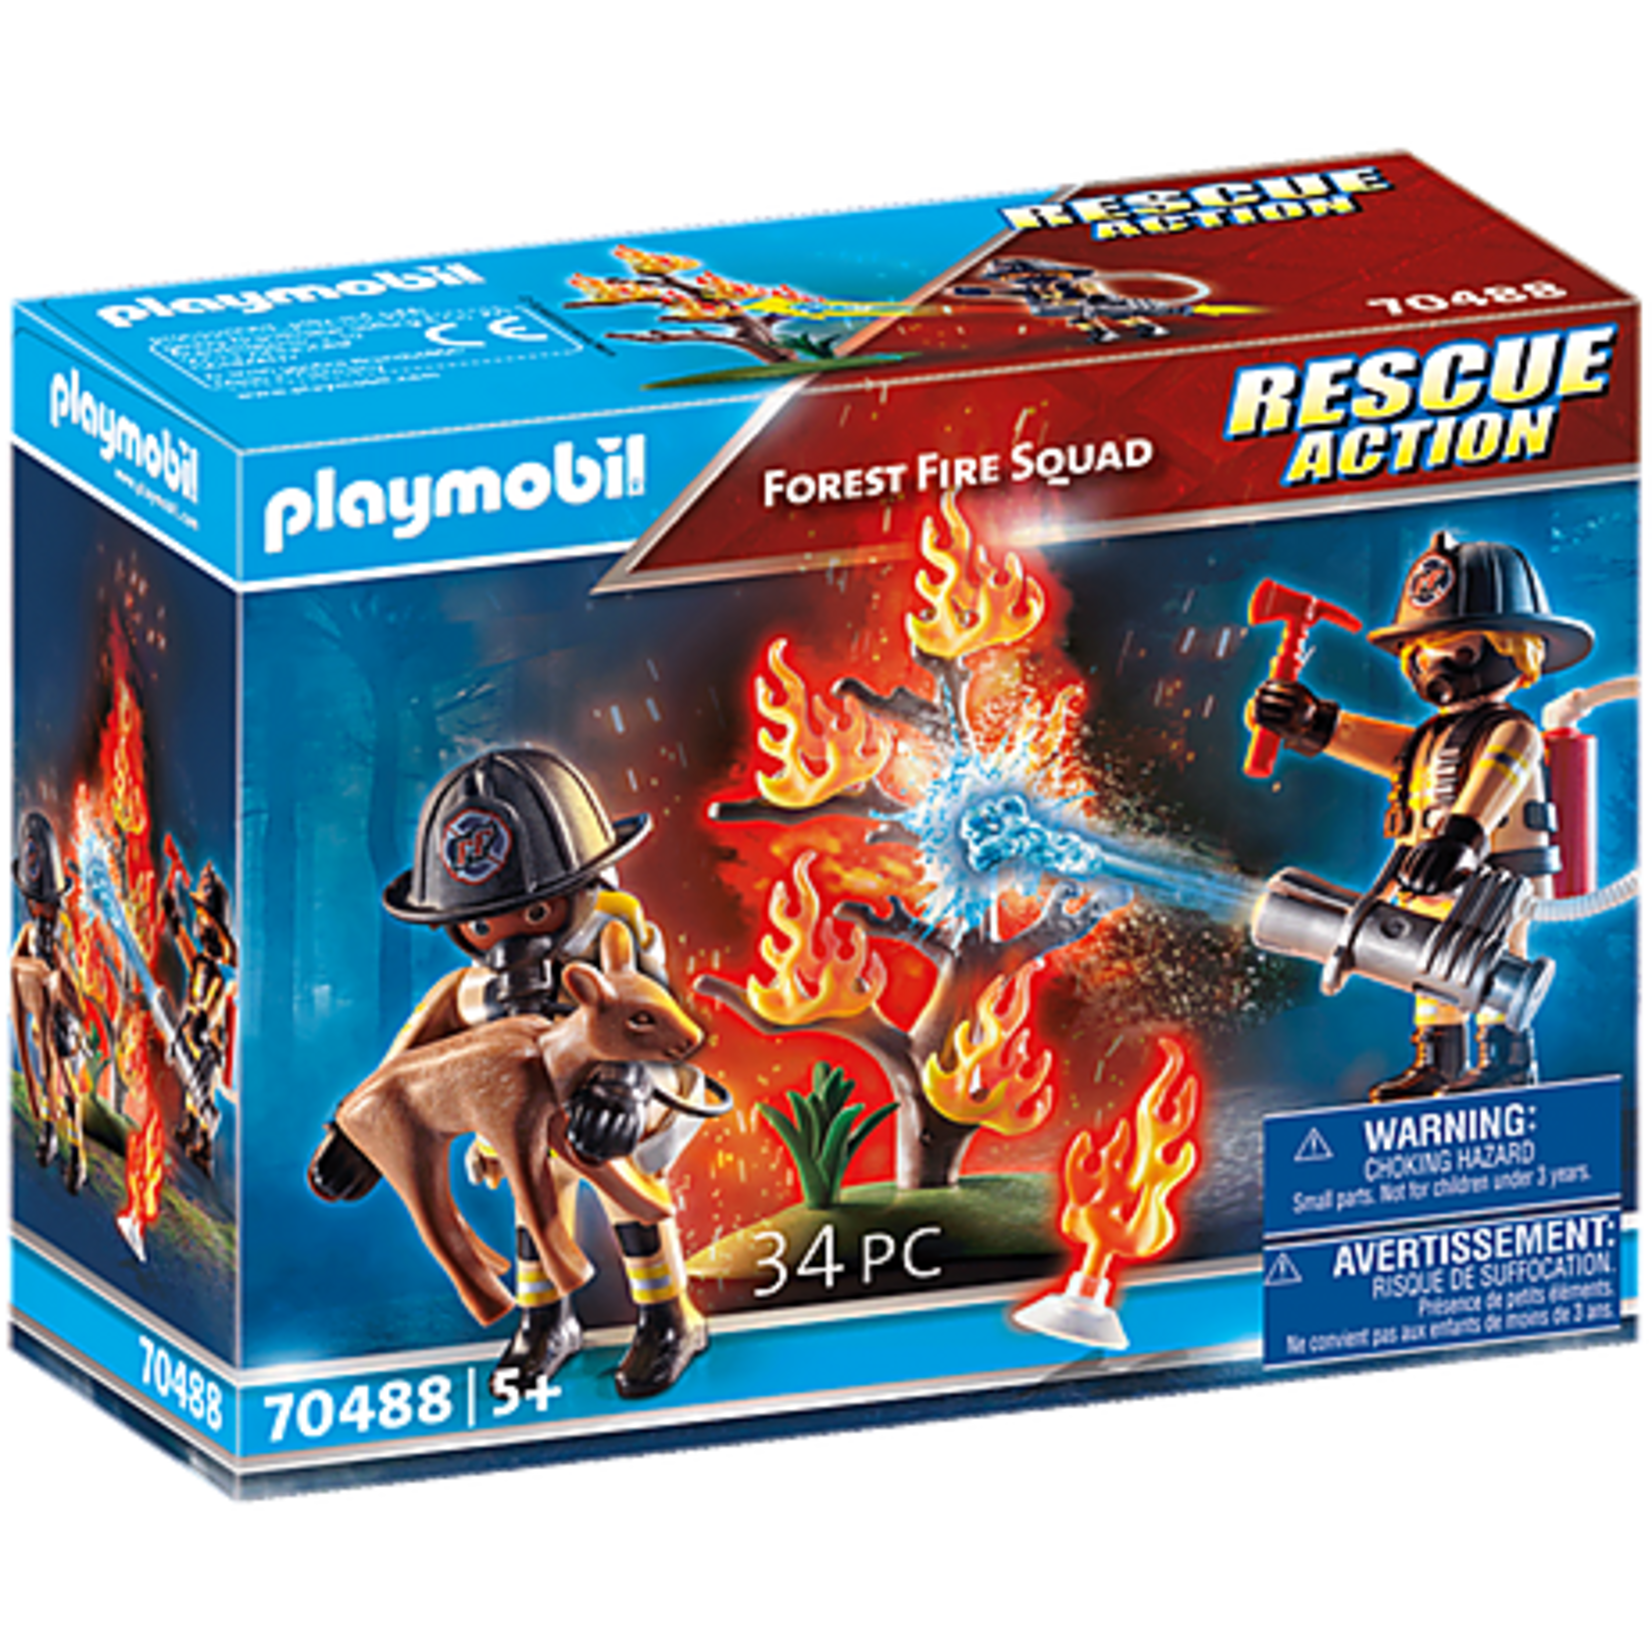 PLAYMOBIL FOREST FIRE SQUAD